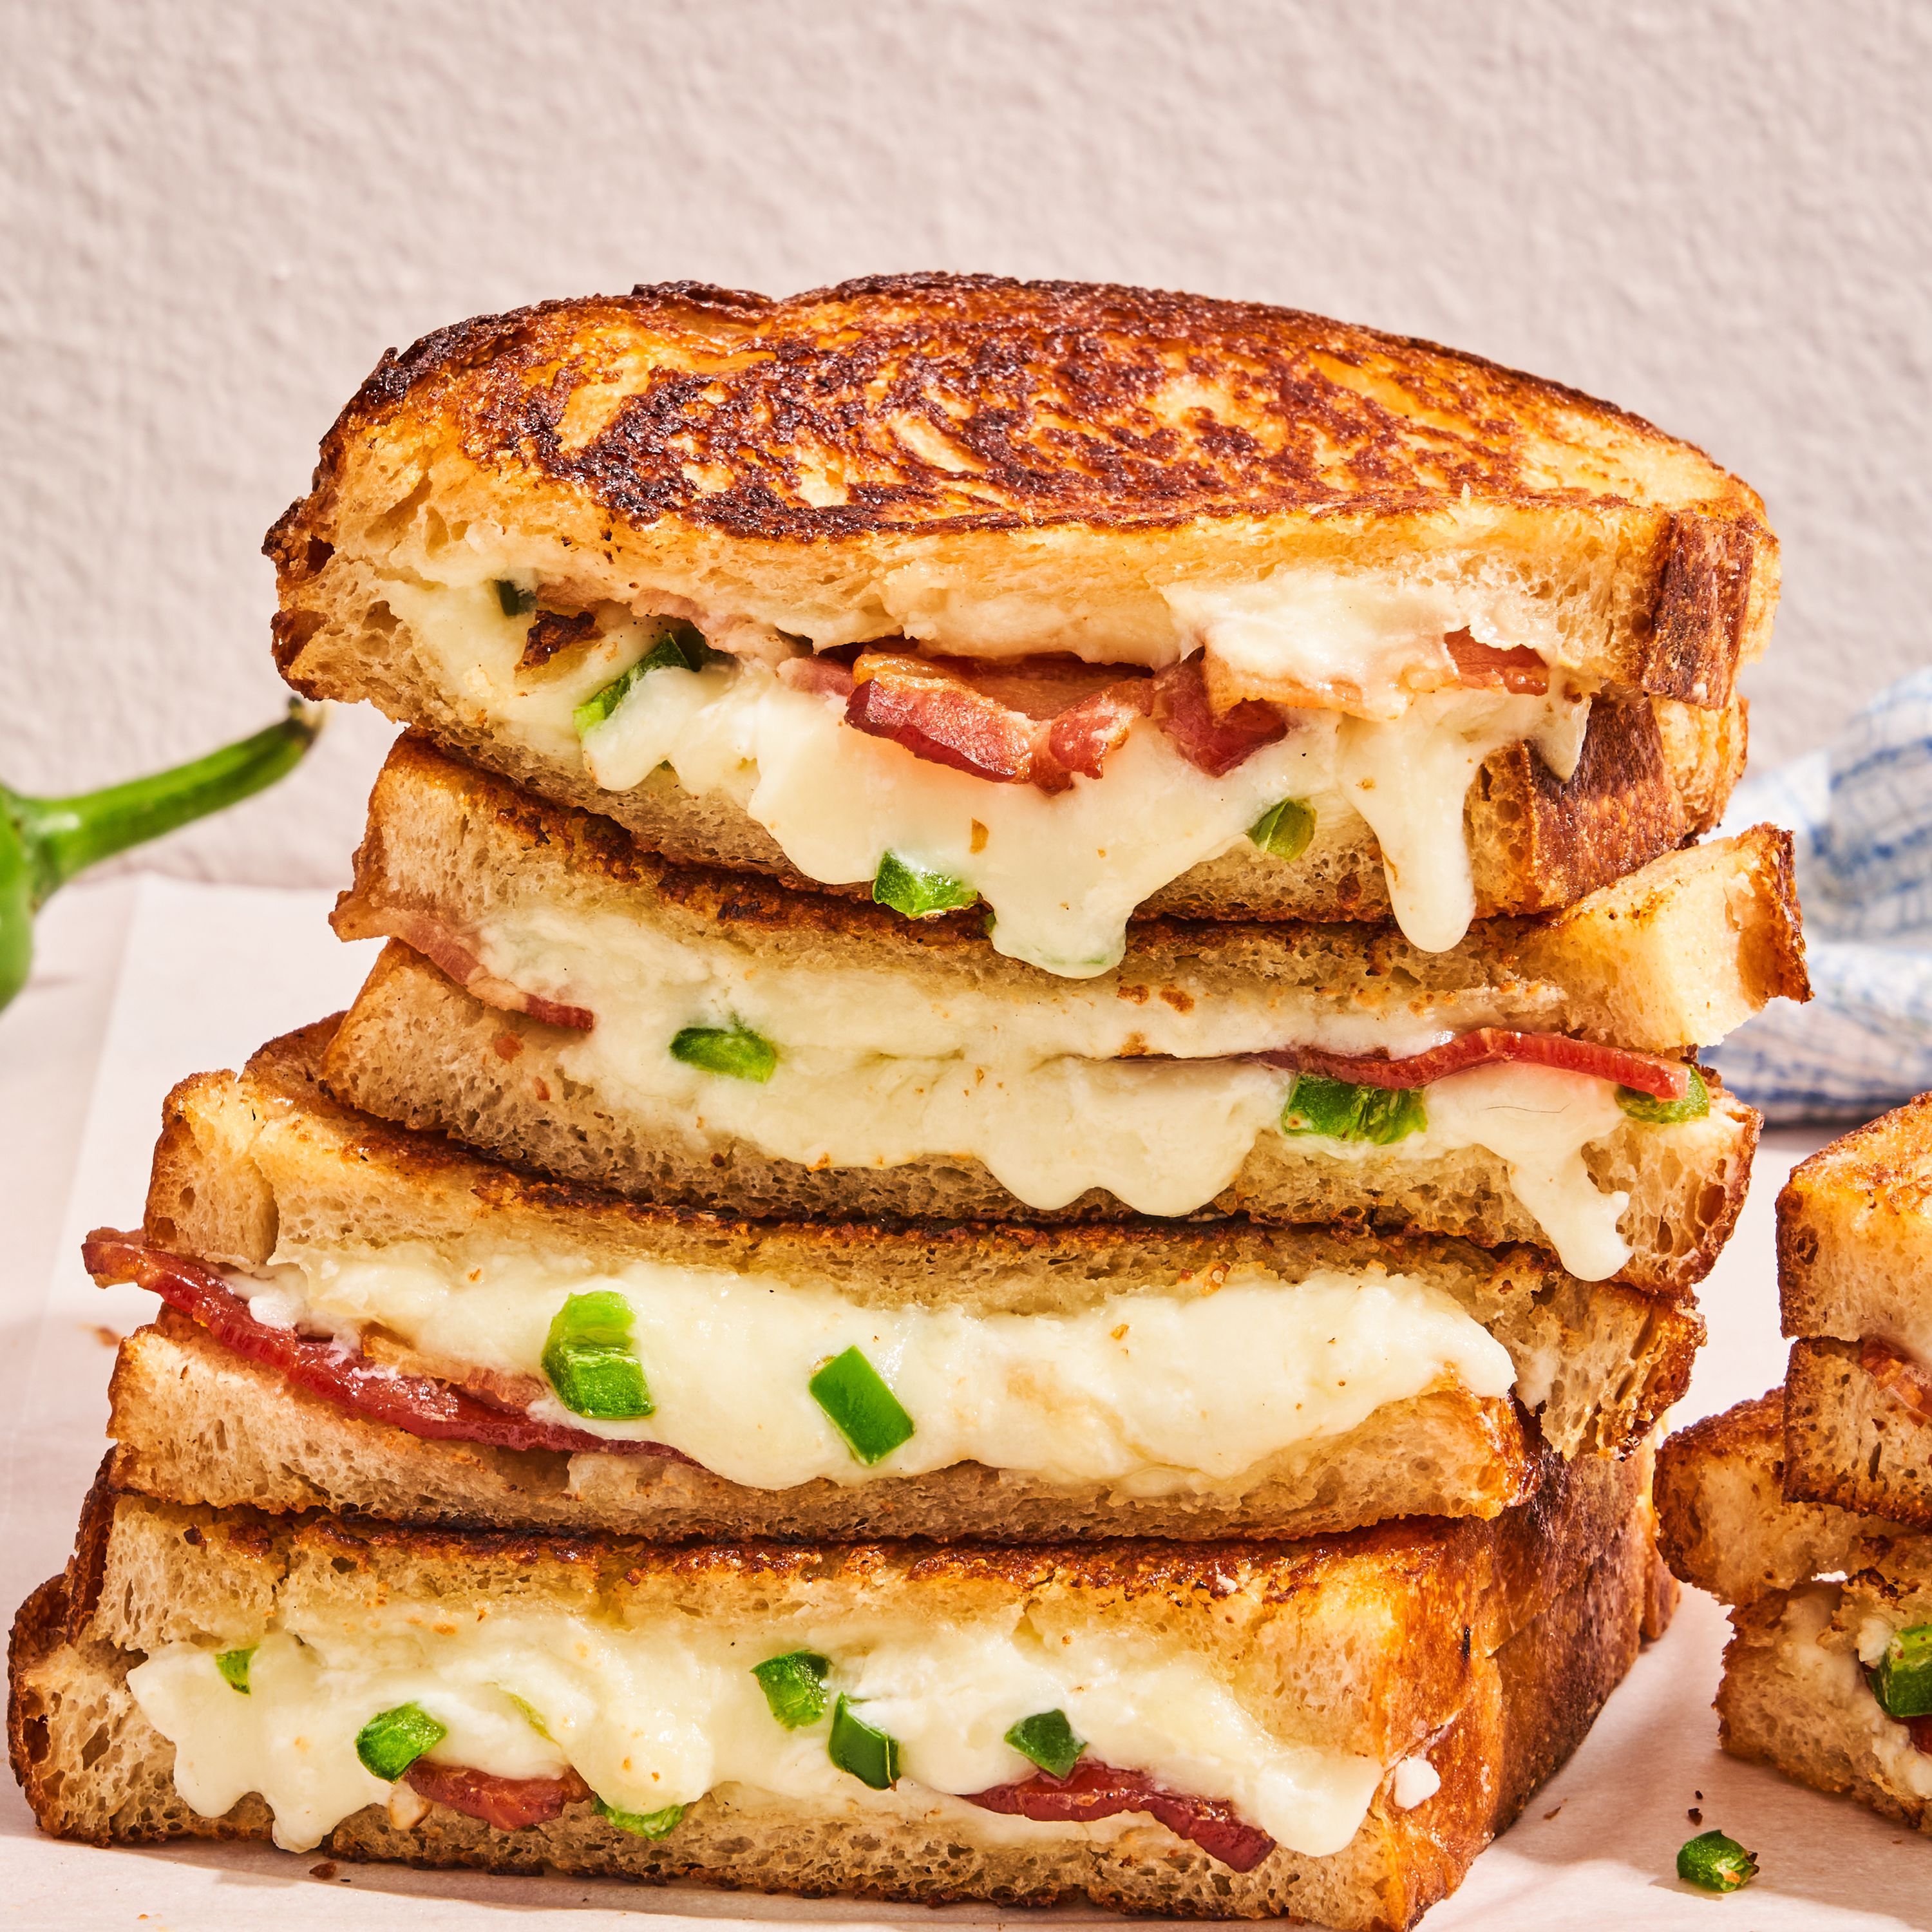 Jalapeño Poppers Meet Grilled Cheese in This Ingenious Mash-Up